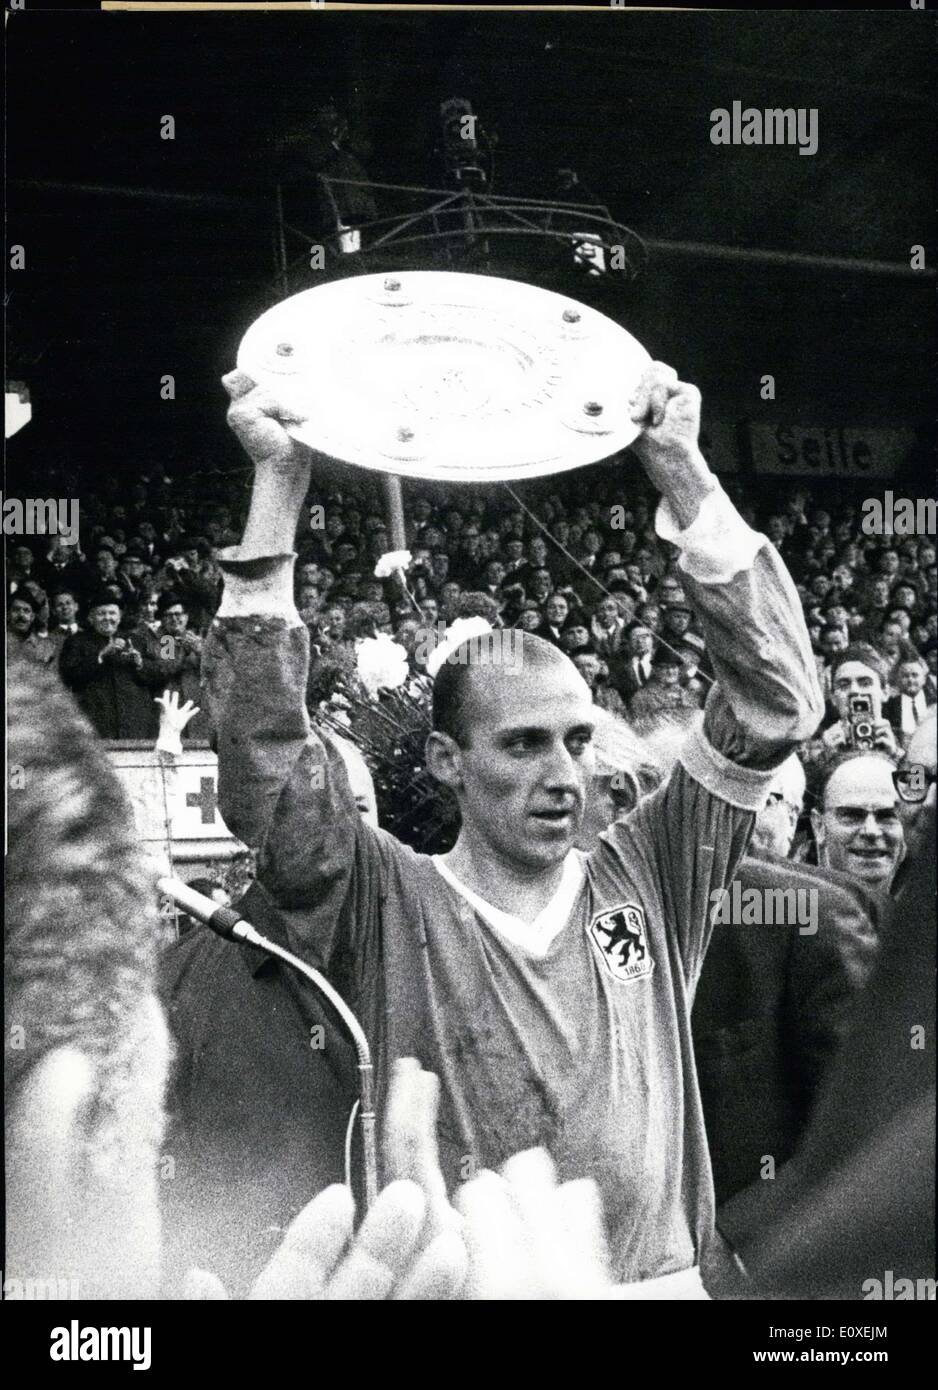 May 28, 1966 - Pictured here is Captain Grosser of 1860 M?nchen as he raises the championship shell. 1860 M?nchen won the Bundesliga, Germany's soccer association, for the first time, playing against Hamburger Sportverein in Munich on 5-28-1966. In the background is Chancellor Erhard and Munich mayor Dr. Vogel. Stock Photo